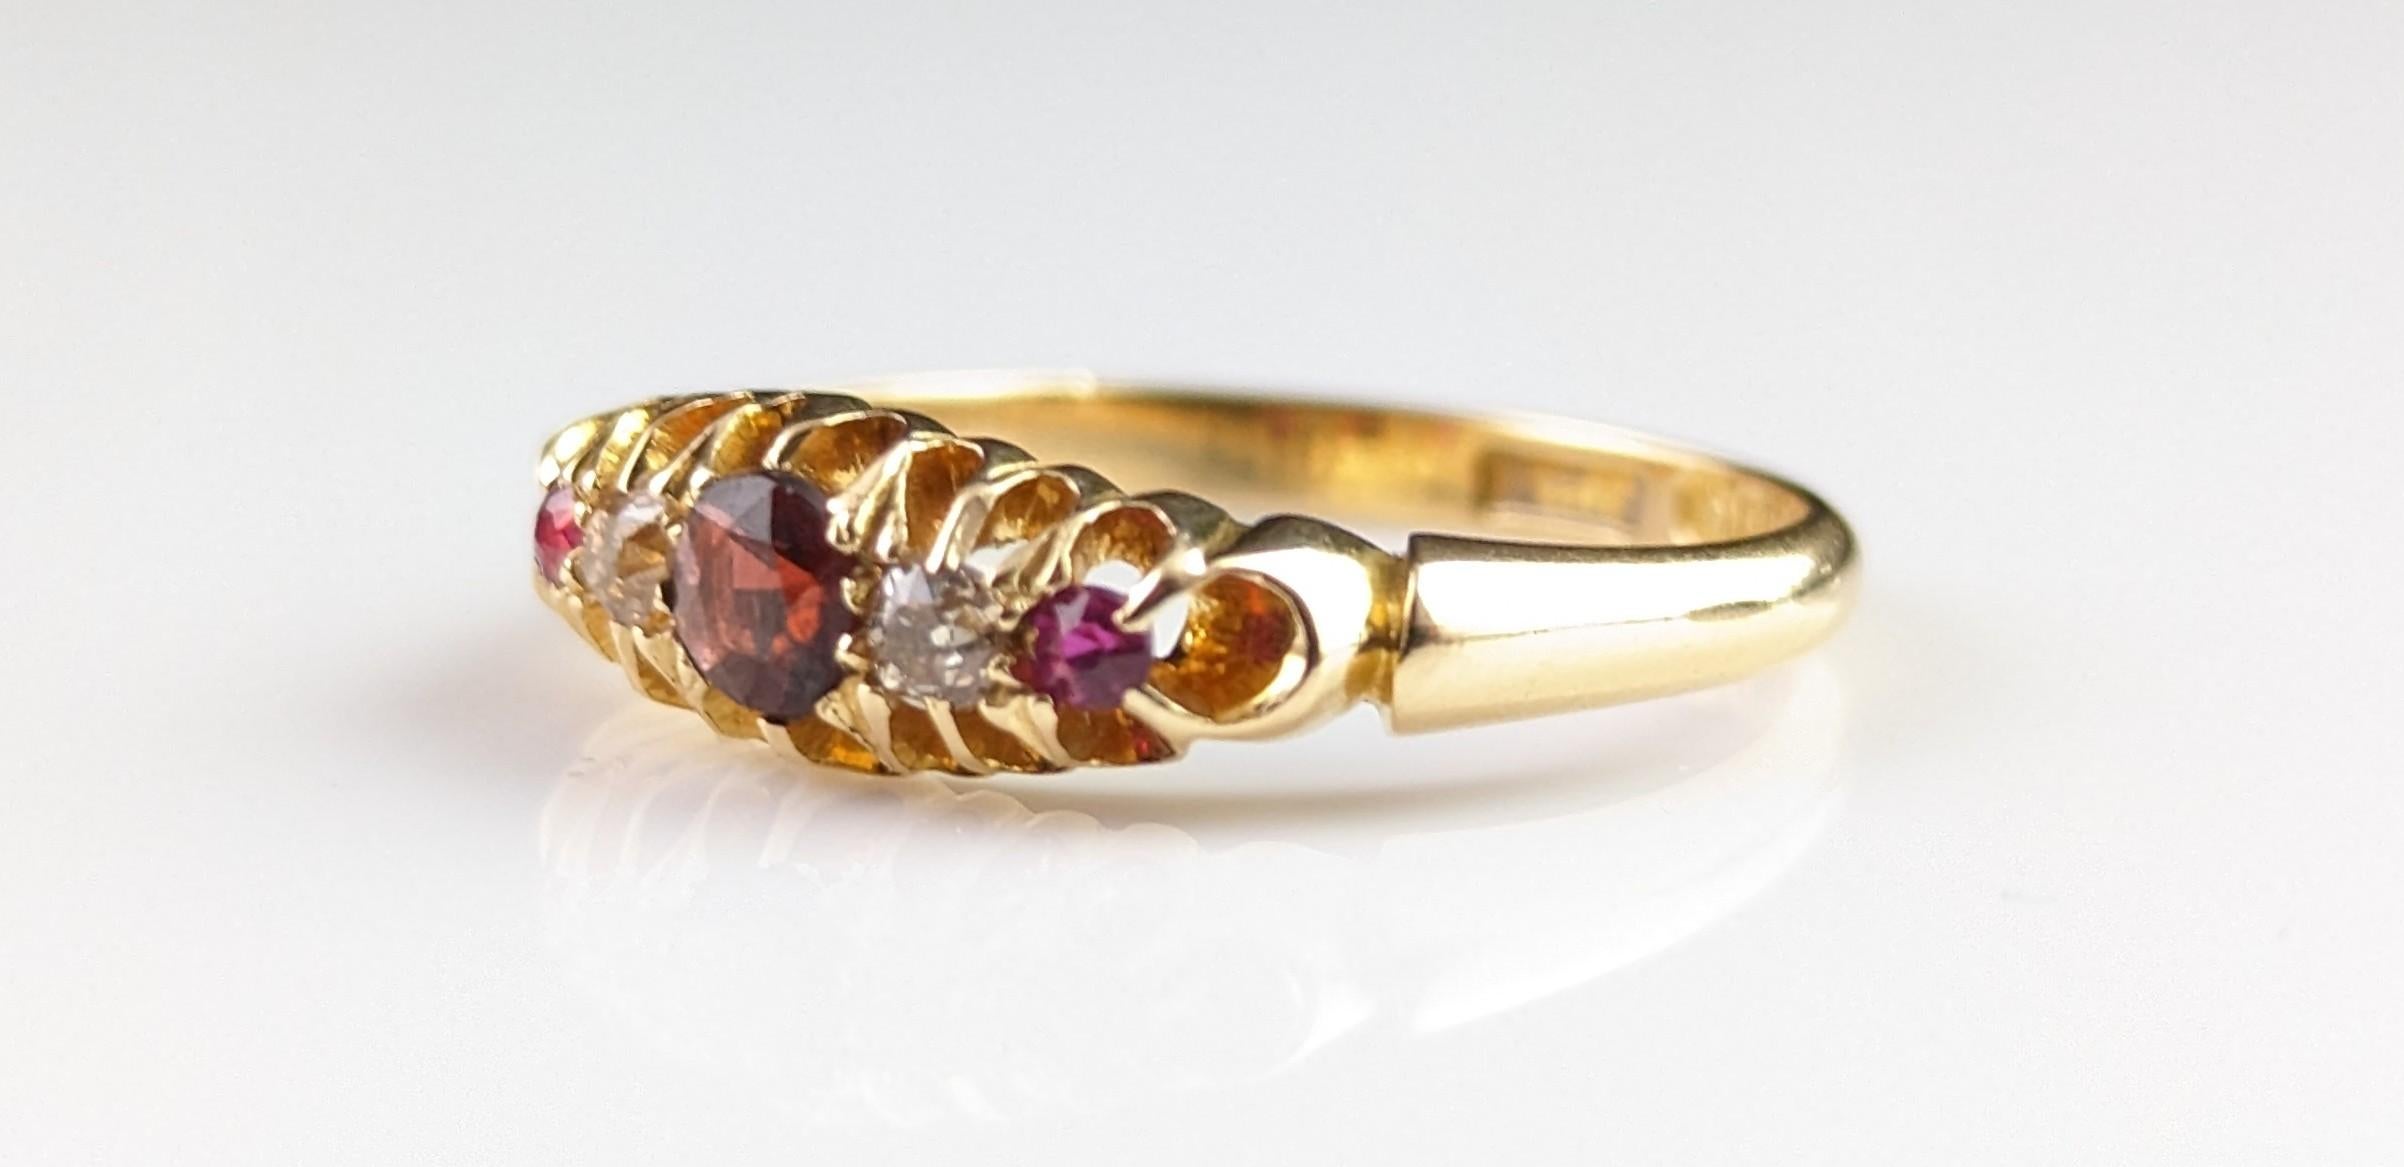 Antique Garnet, Ruby and Diamond Ring, 18ct Gold 9